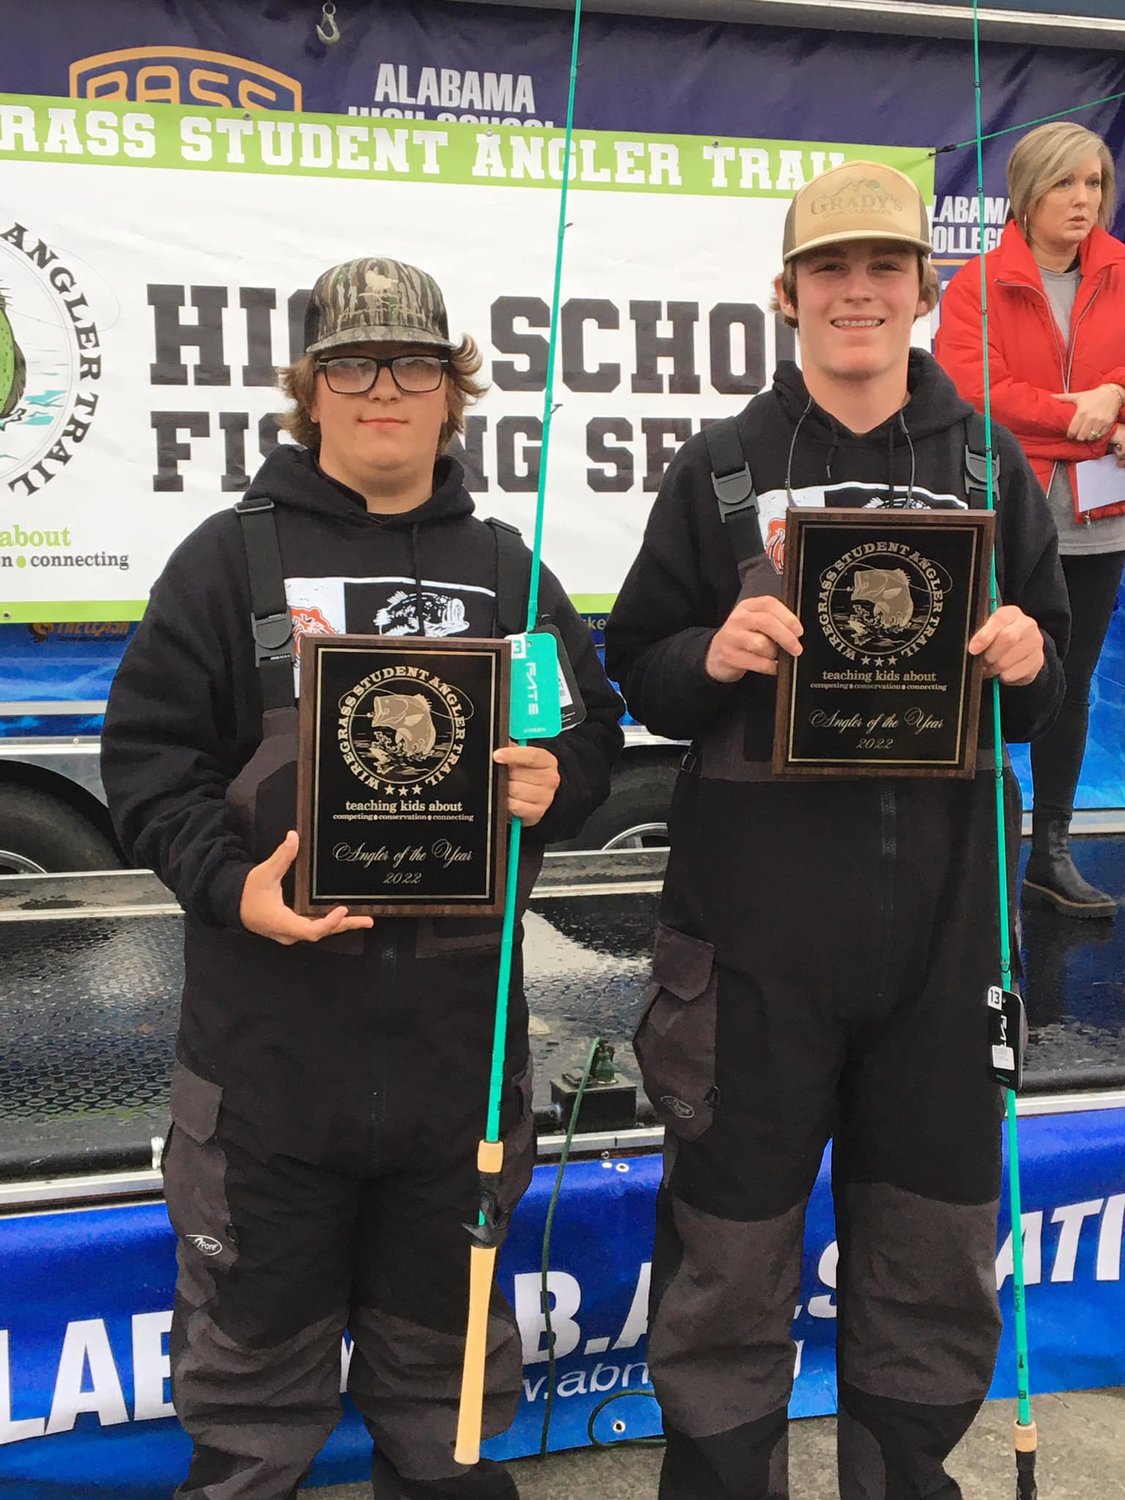 James Travis and Jameson Norris collected their Angler of the Year trophies after the season finale of the Wiregrass Student Angler Trail on Lake Eufaula Saturday, Nov. 19. They caught 20 total fish for 38.92 total pounds and 1,187 points on the season.